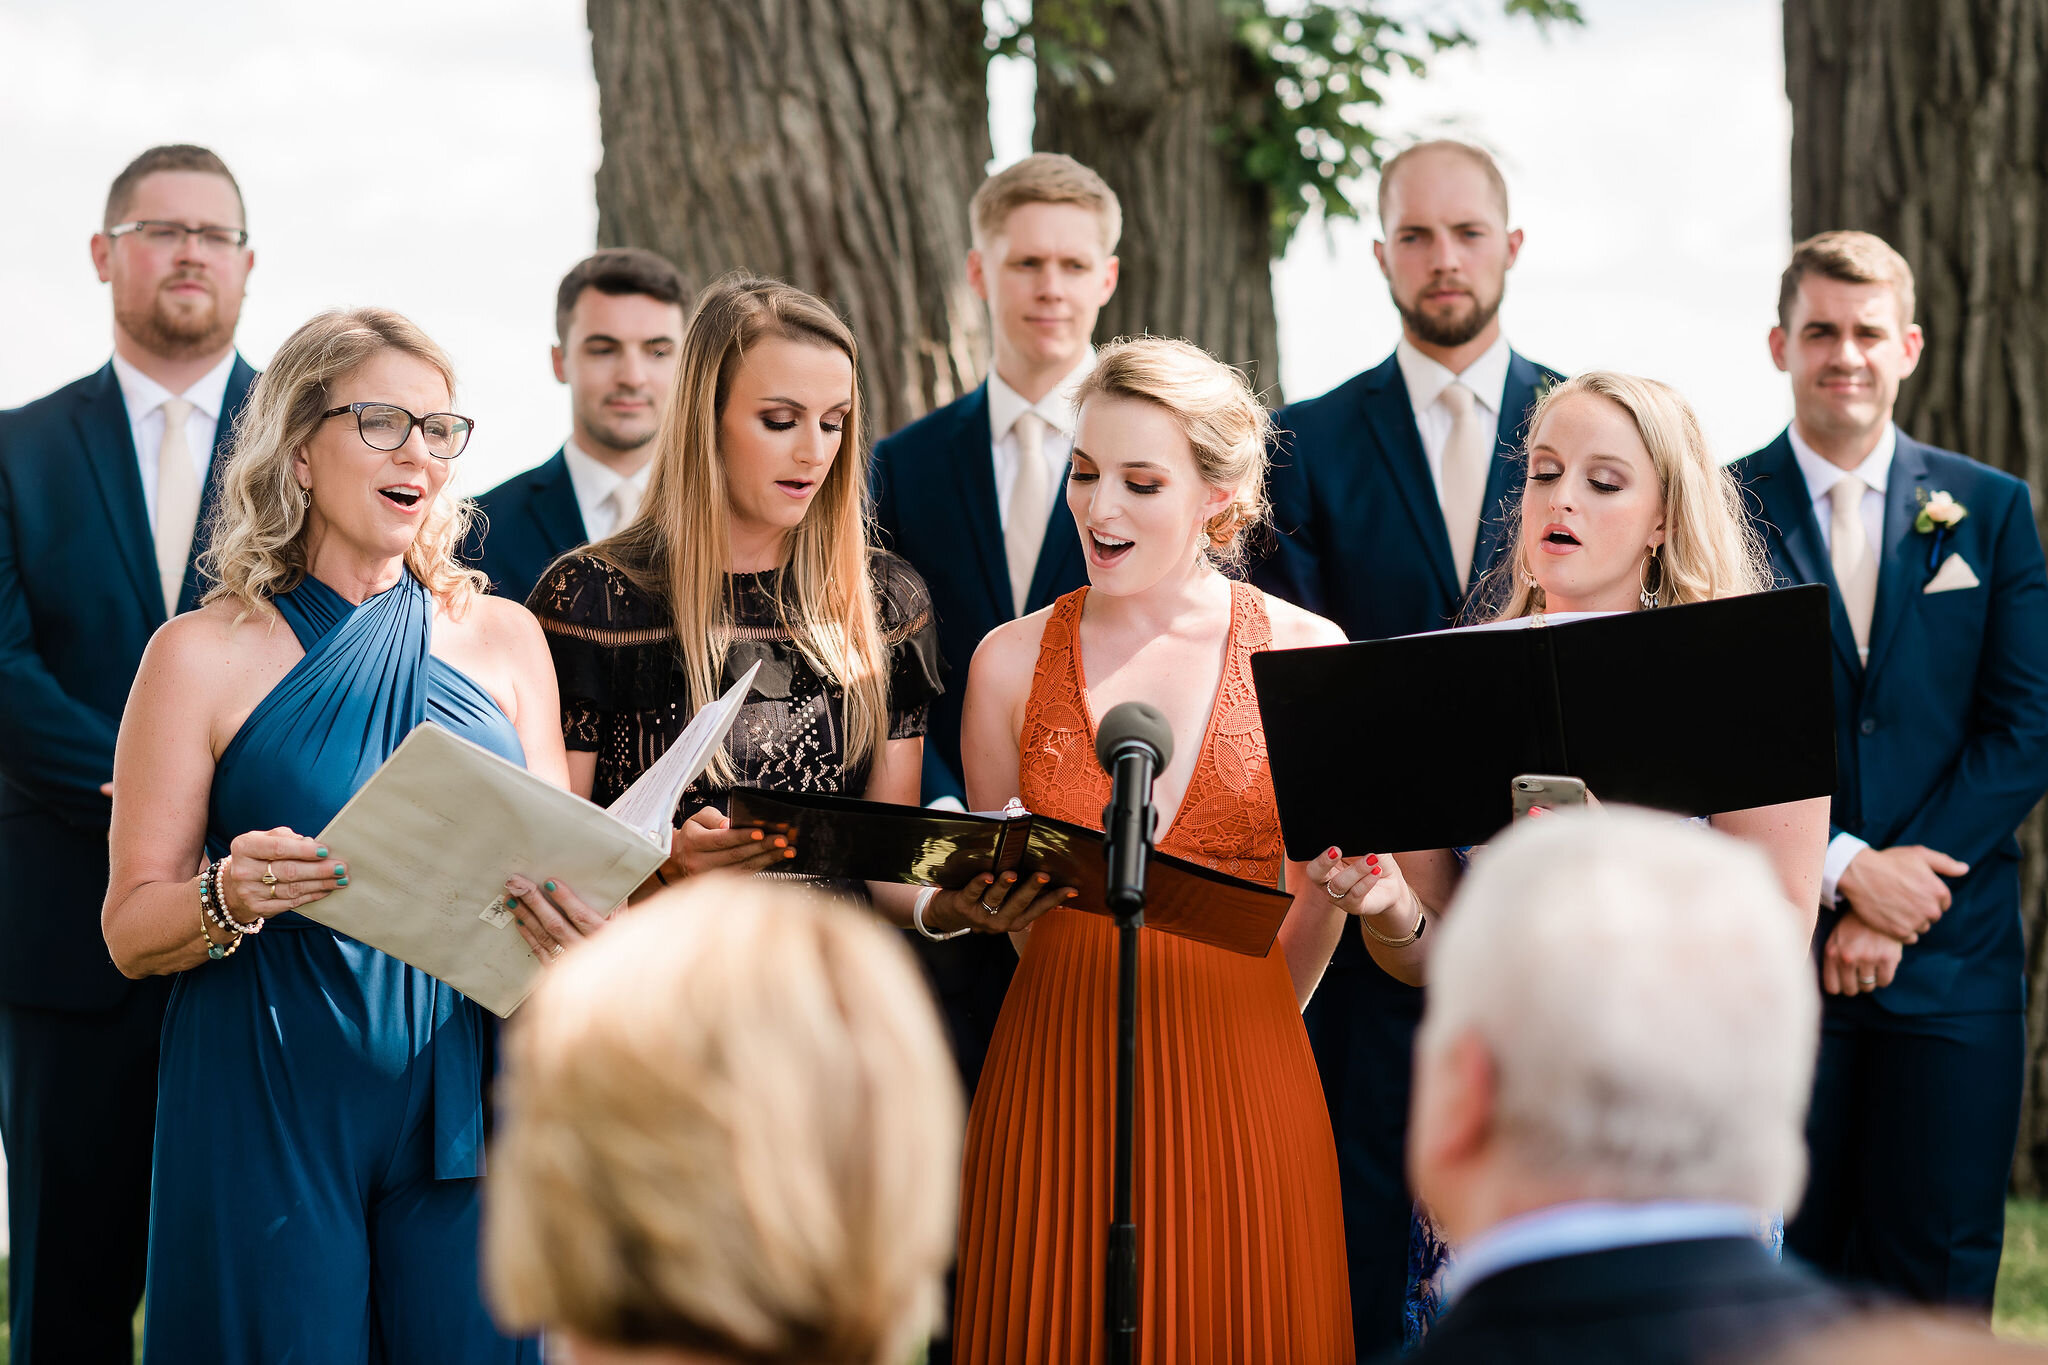 Wedding guests singing at the ceremony